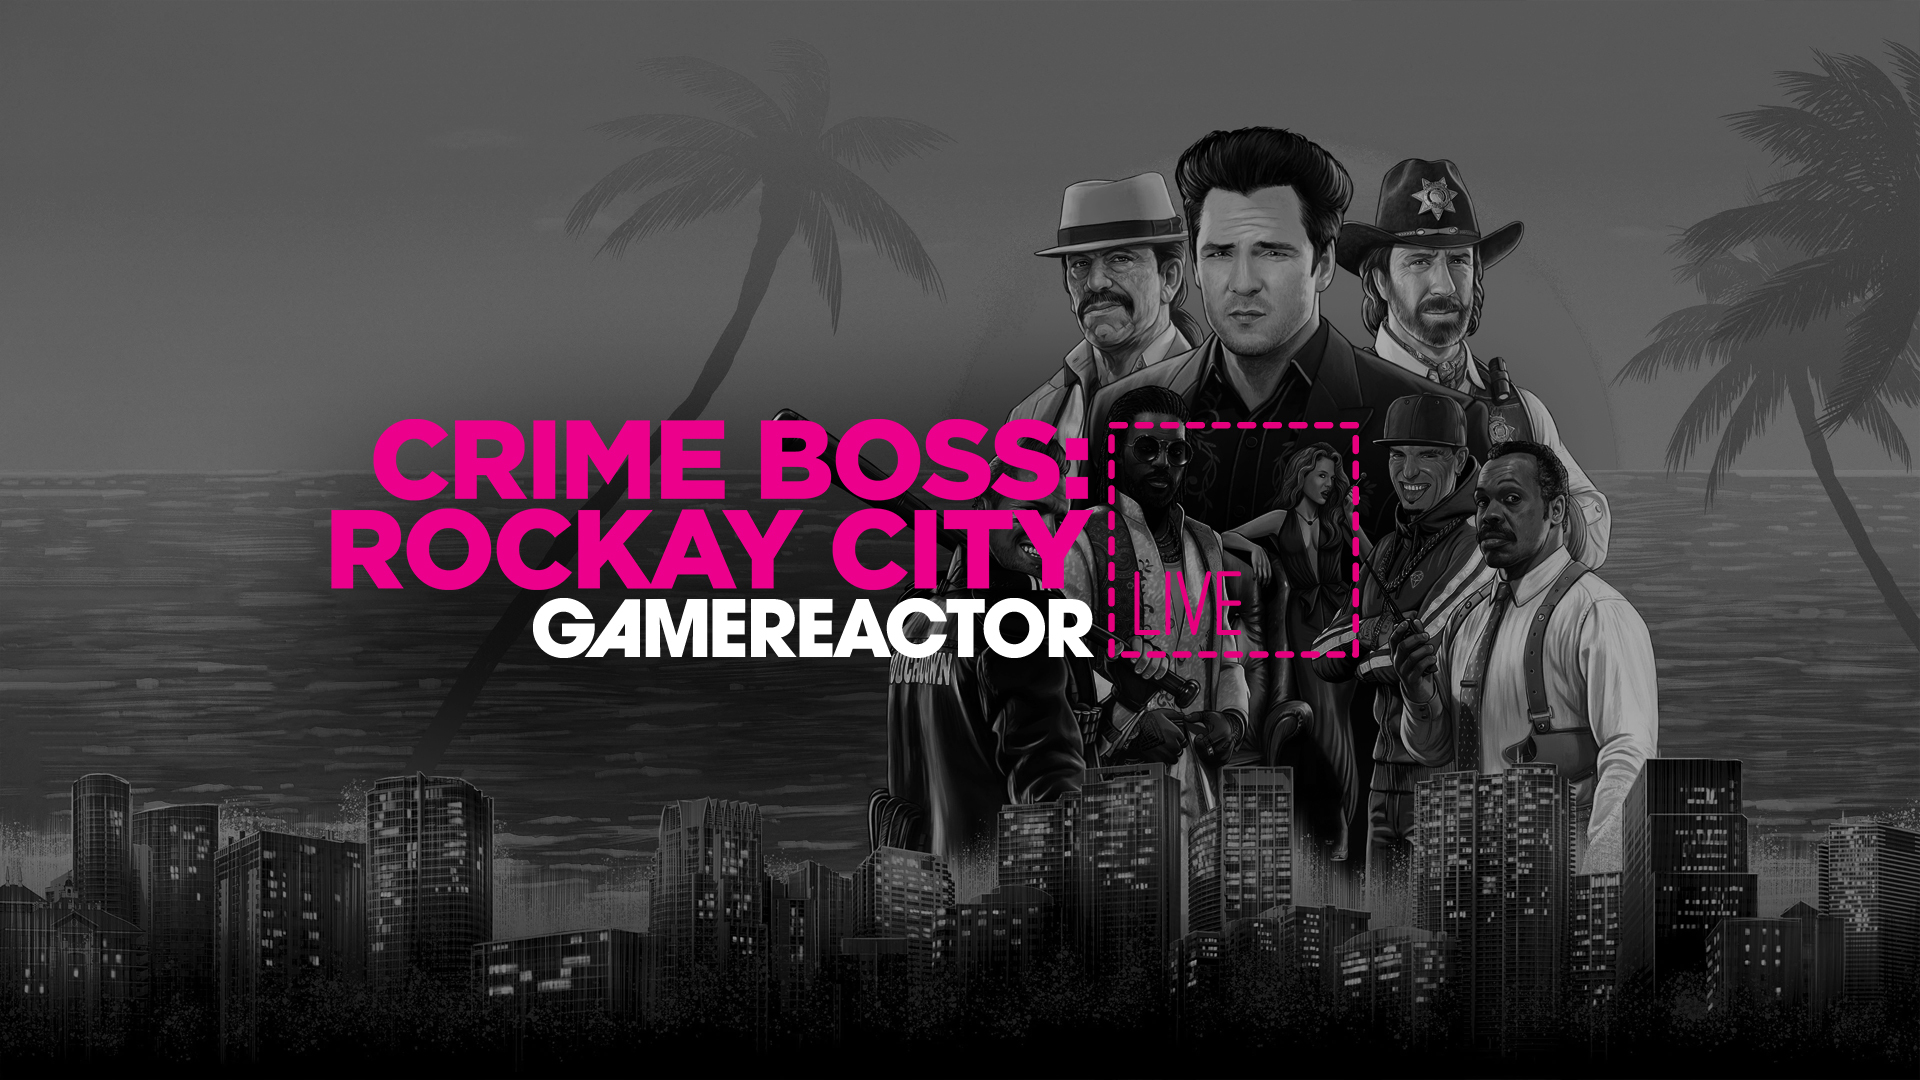 Today on GR Live we become bank robbers with Crime Boss: Rockay City